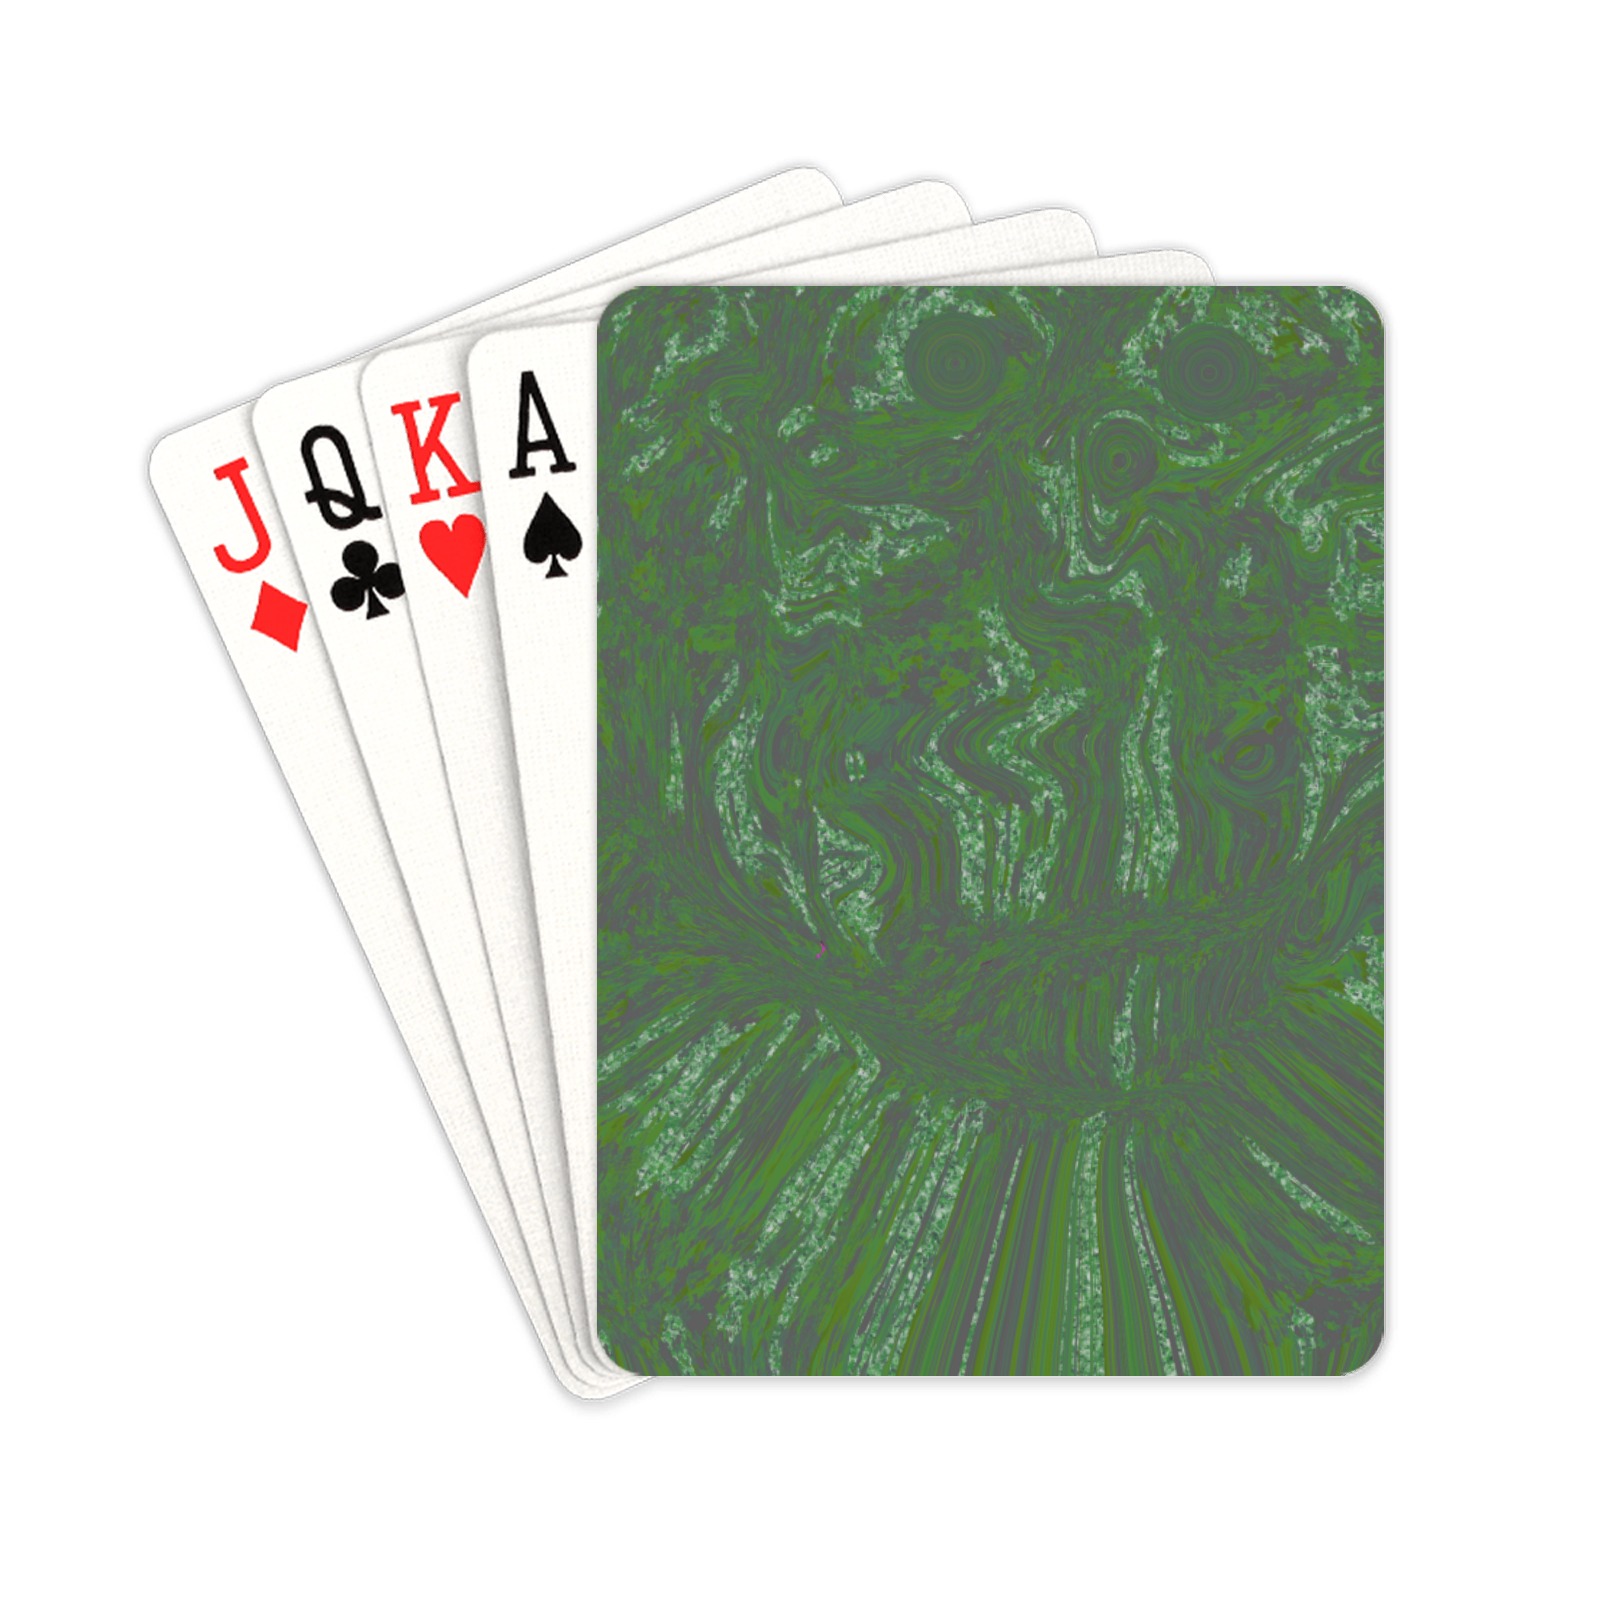 ocean storms green Playing Cards 2.5"x3.5"